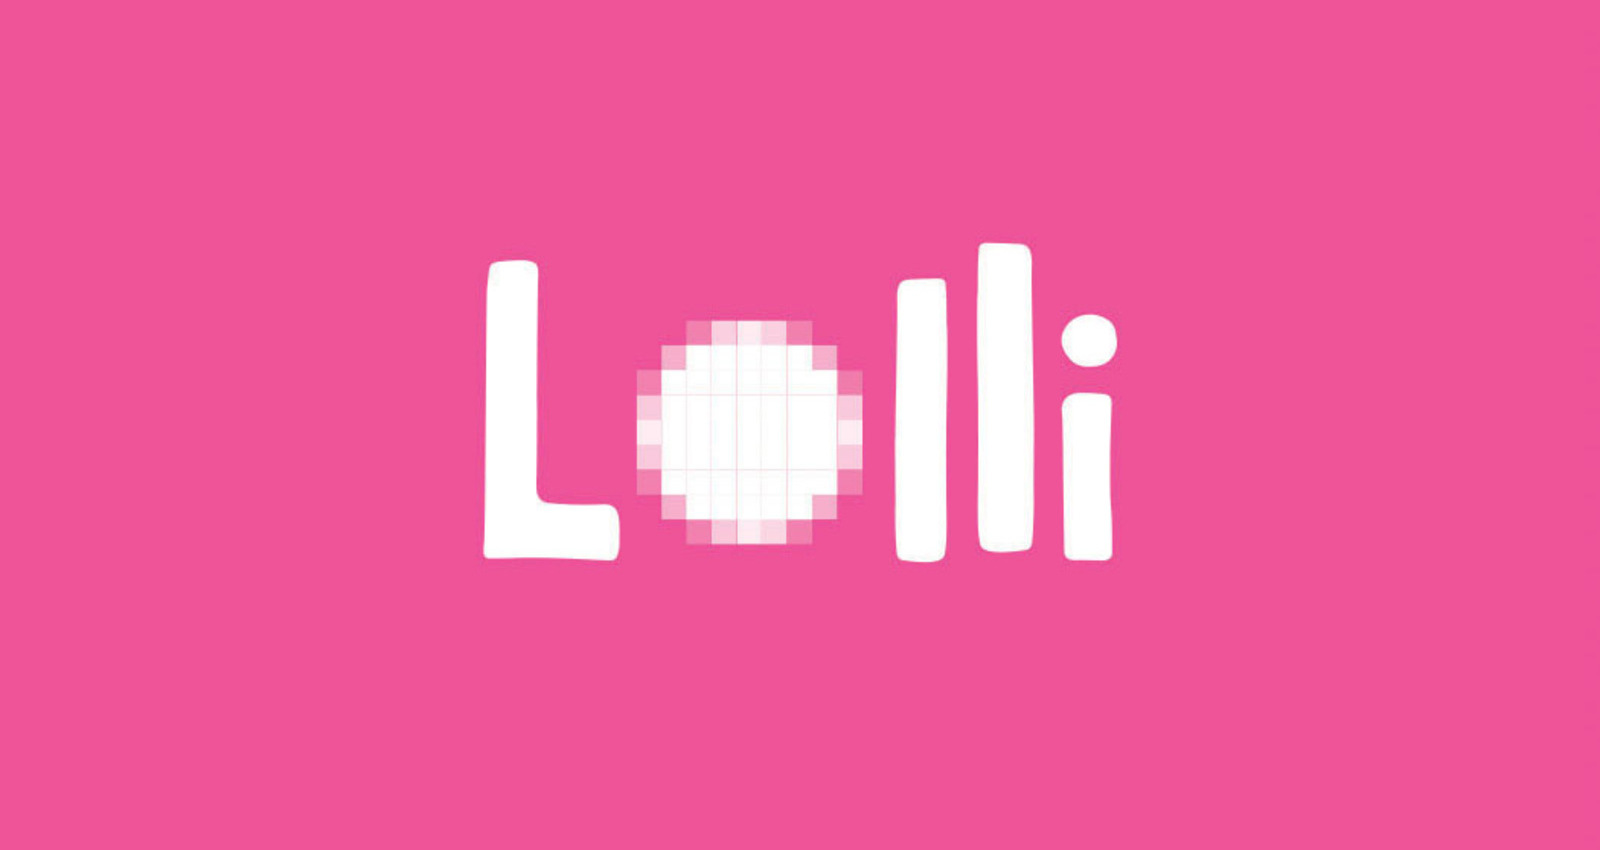 Lolli: The Exhibit Nobody Wants to Talk About